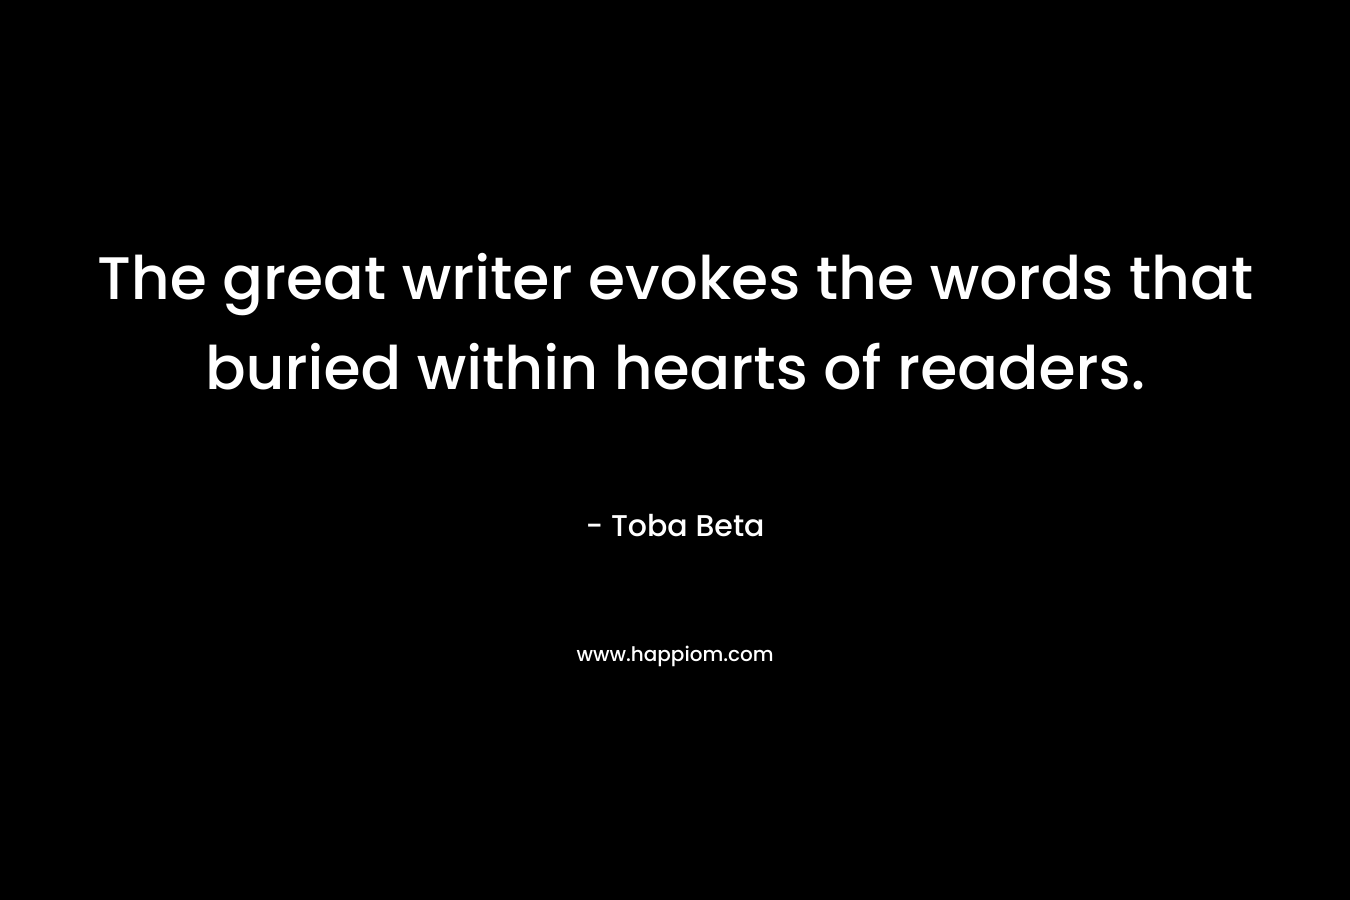 The great writer evokes the words that buried within hearts of readers.